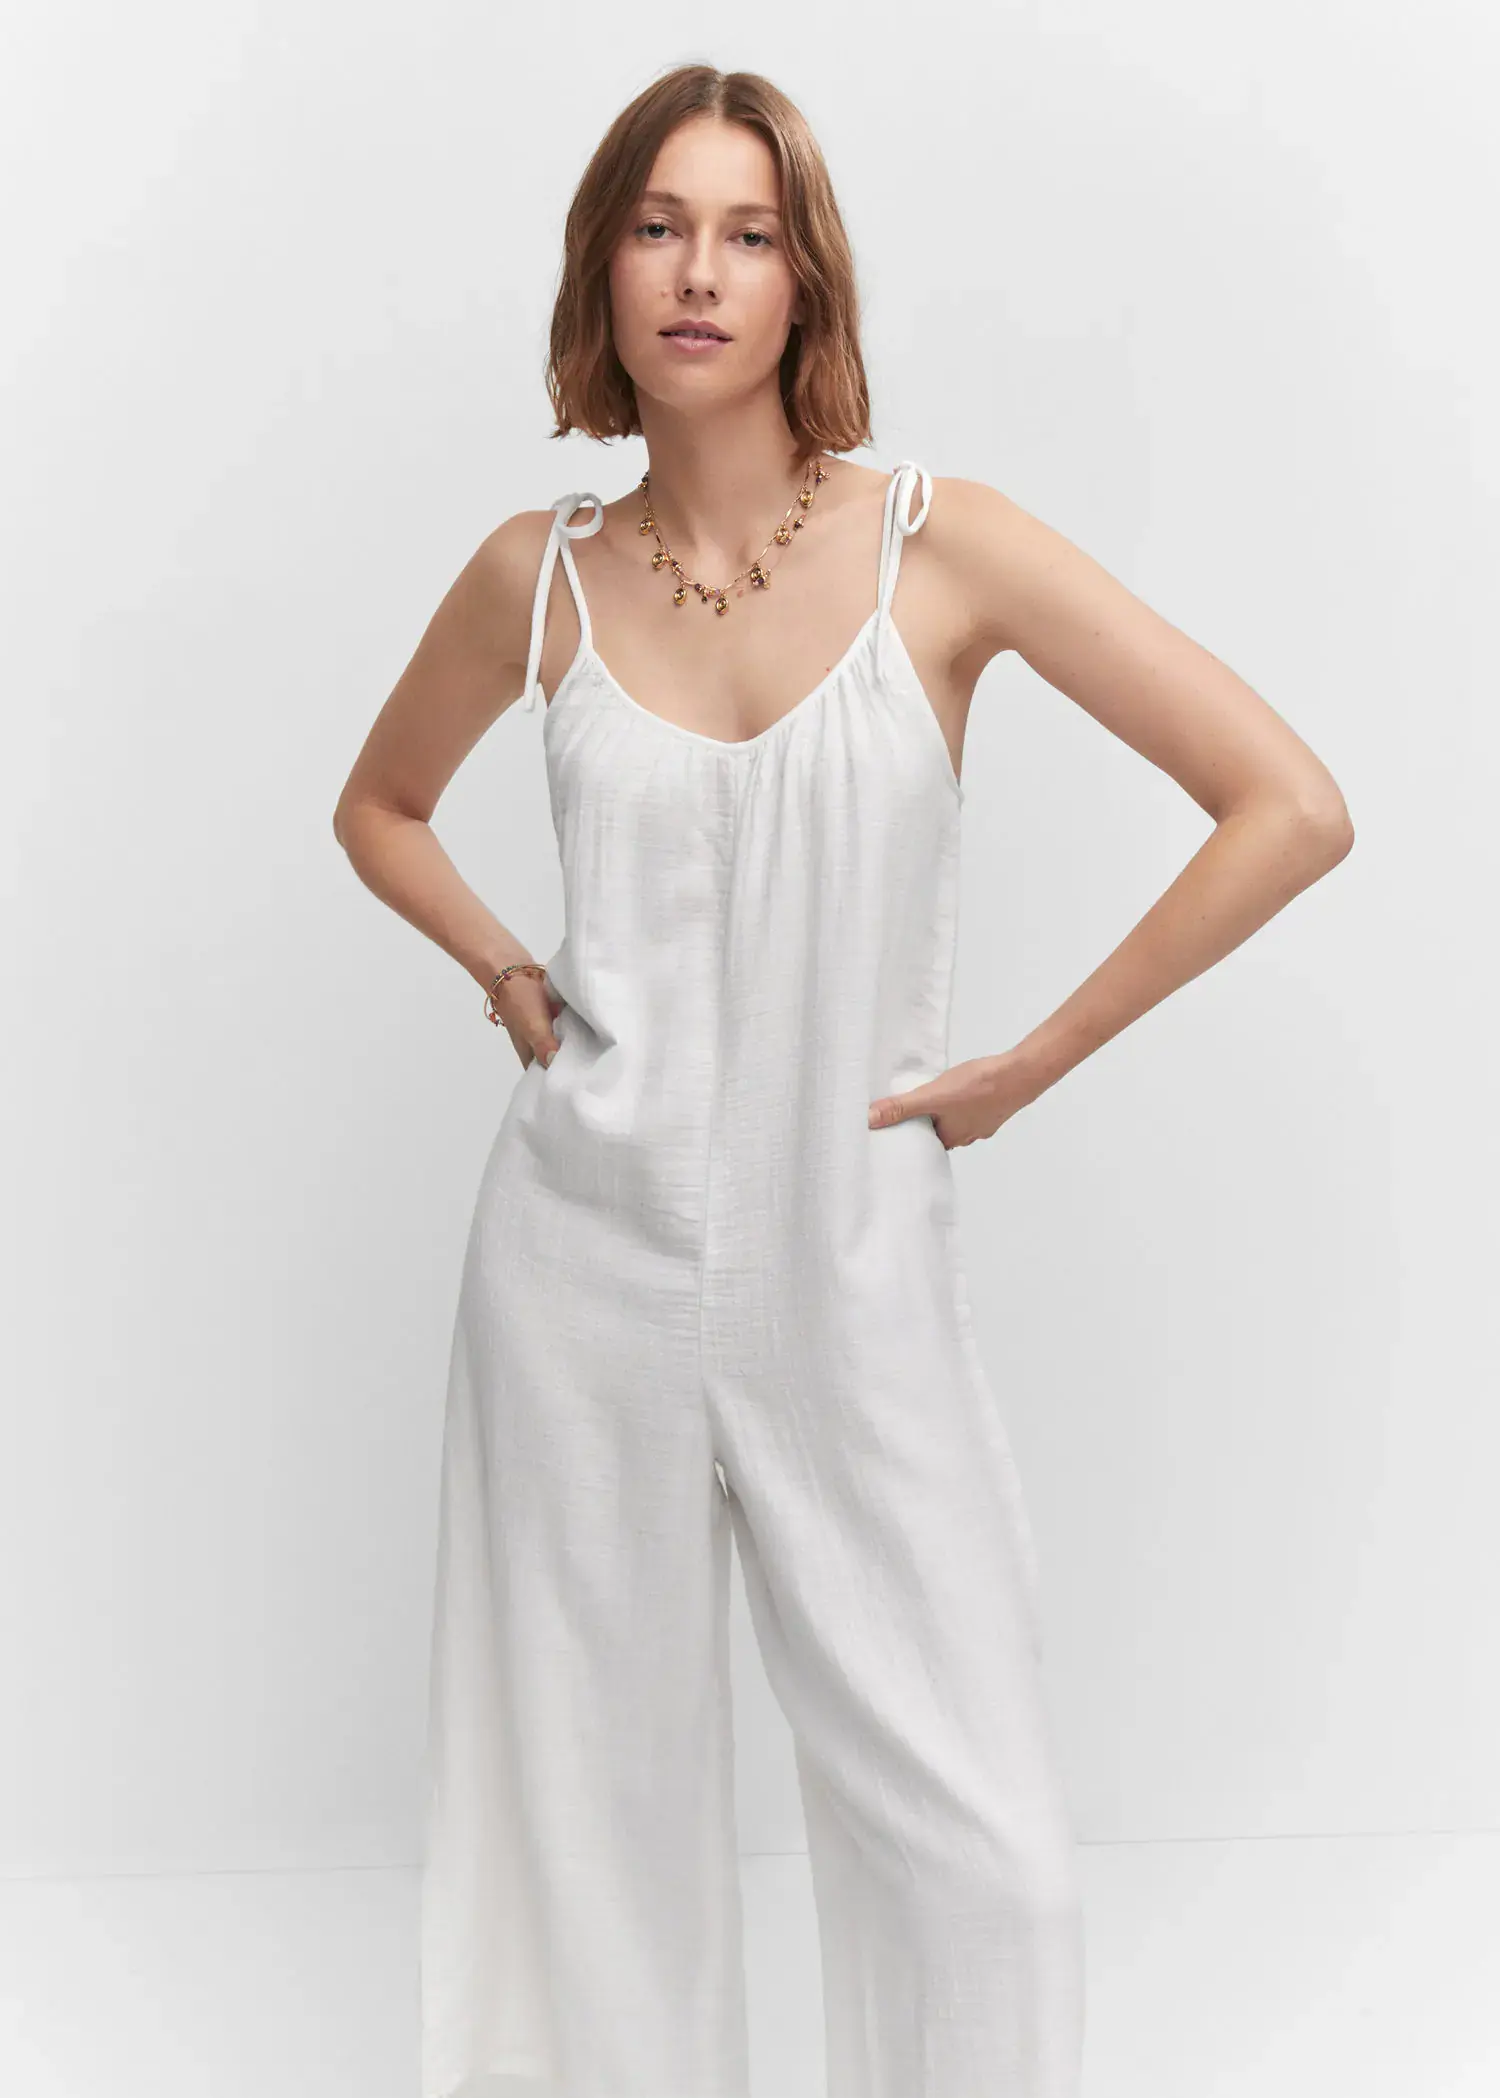 Mango Textured jumpsuit with bows. a woman wearing a white jumpsuit posing for a picture. 